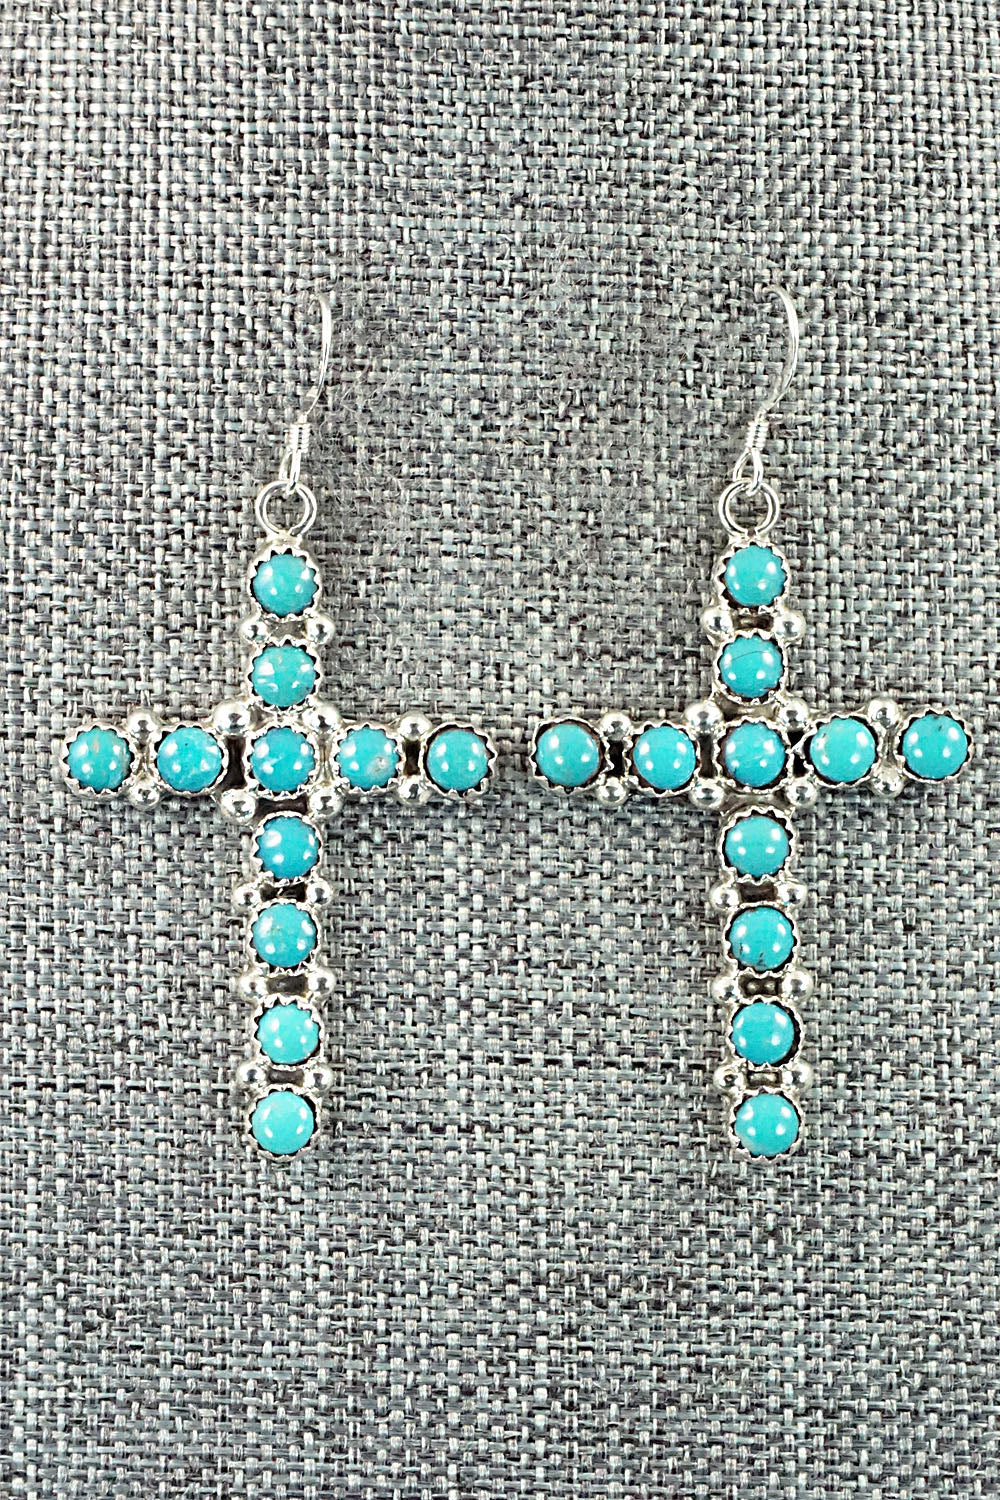 Turquoise and Sterling Silver Earrings - Roberta Begay